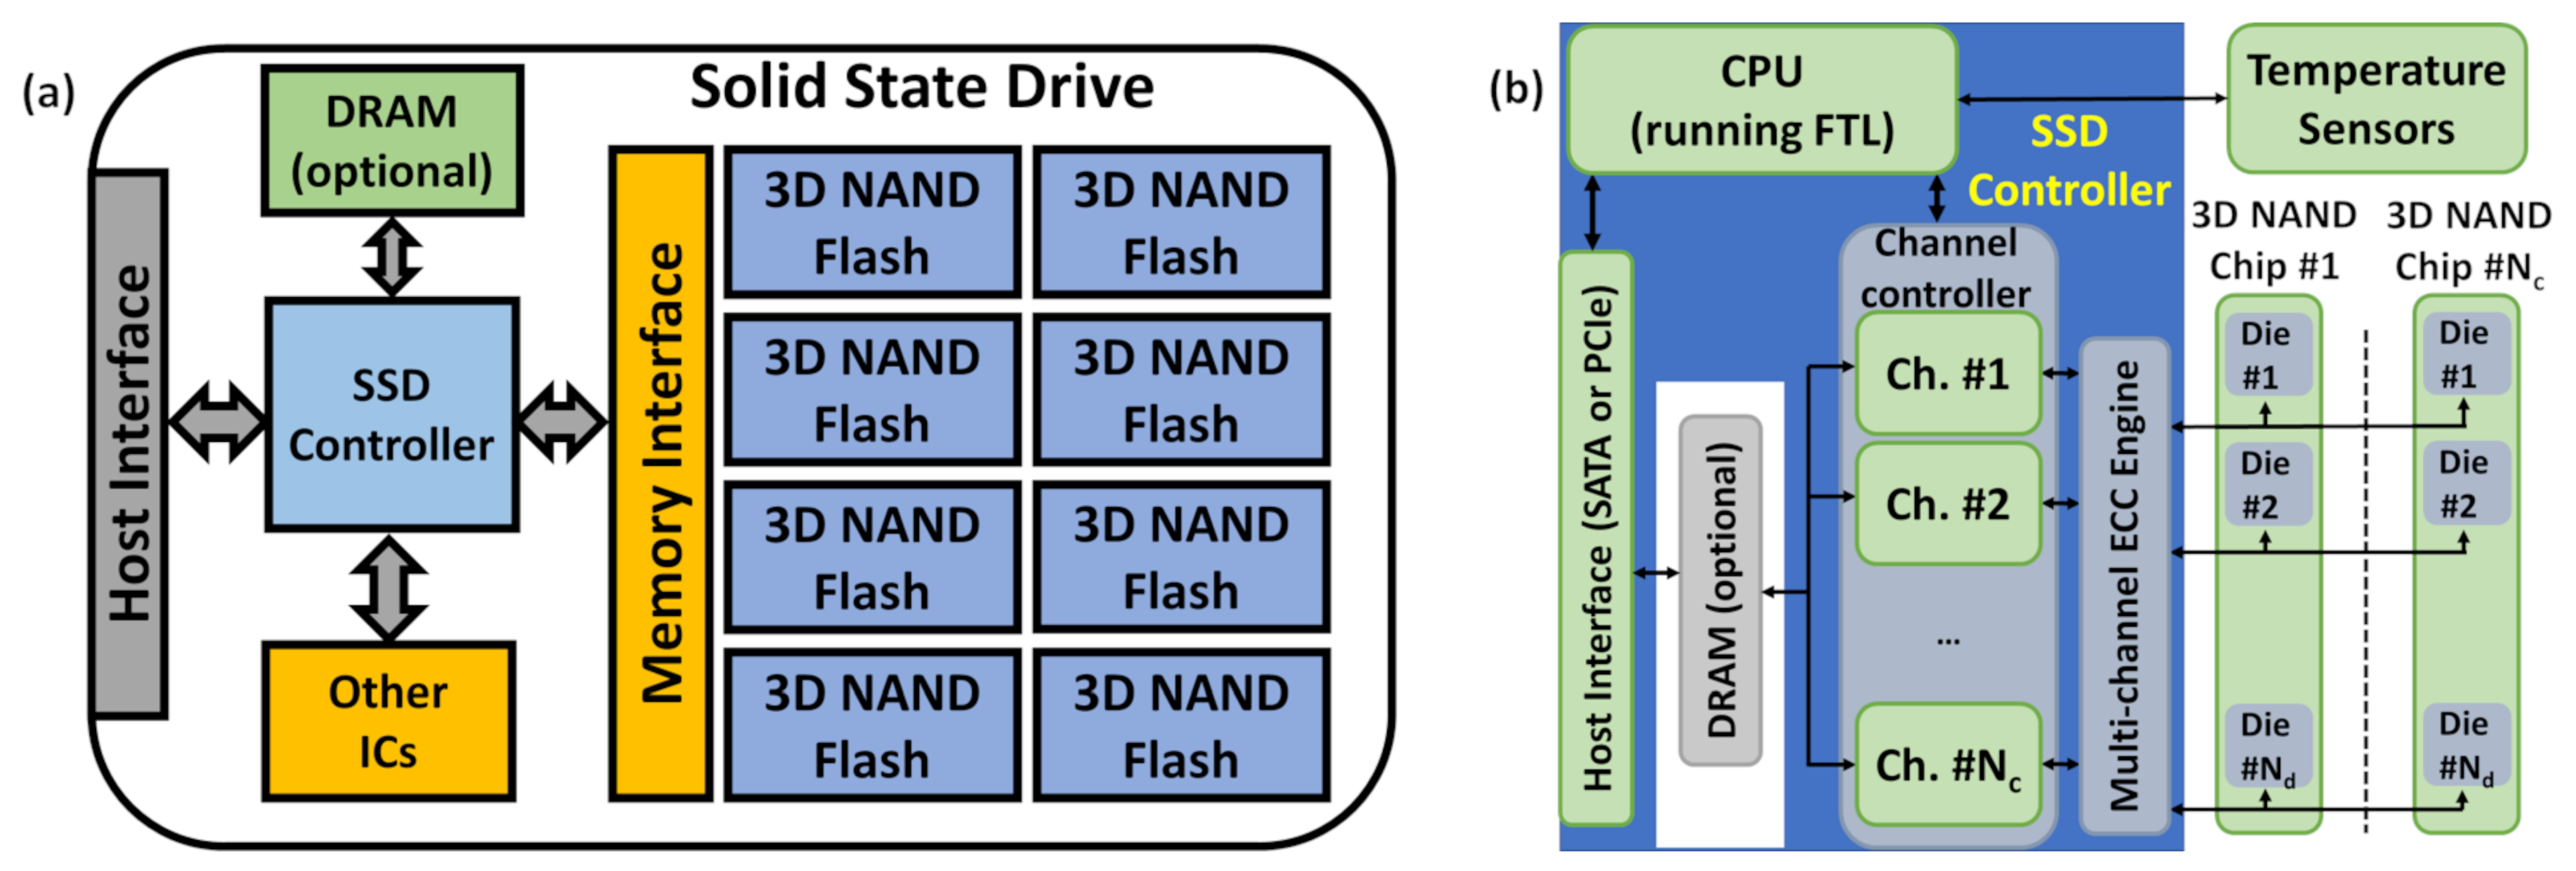 Electronics | Free Full-Text | Assessing the Role of Program Suspend  Operation in 3D NAND Flash Based Solid State Drives | HTML